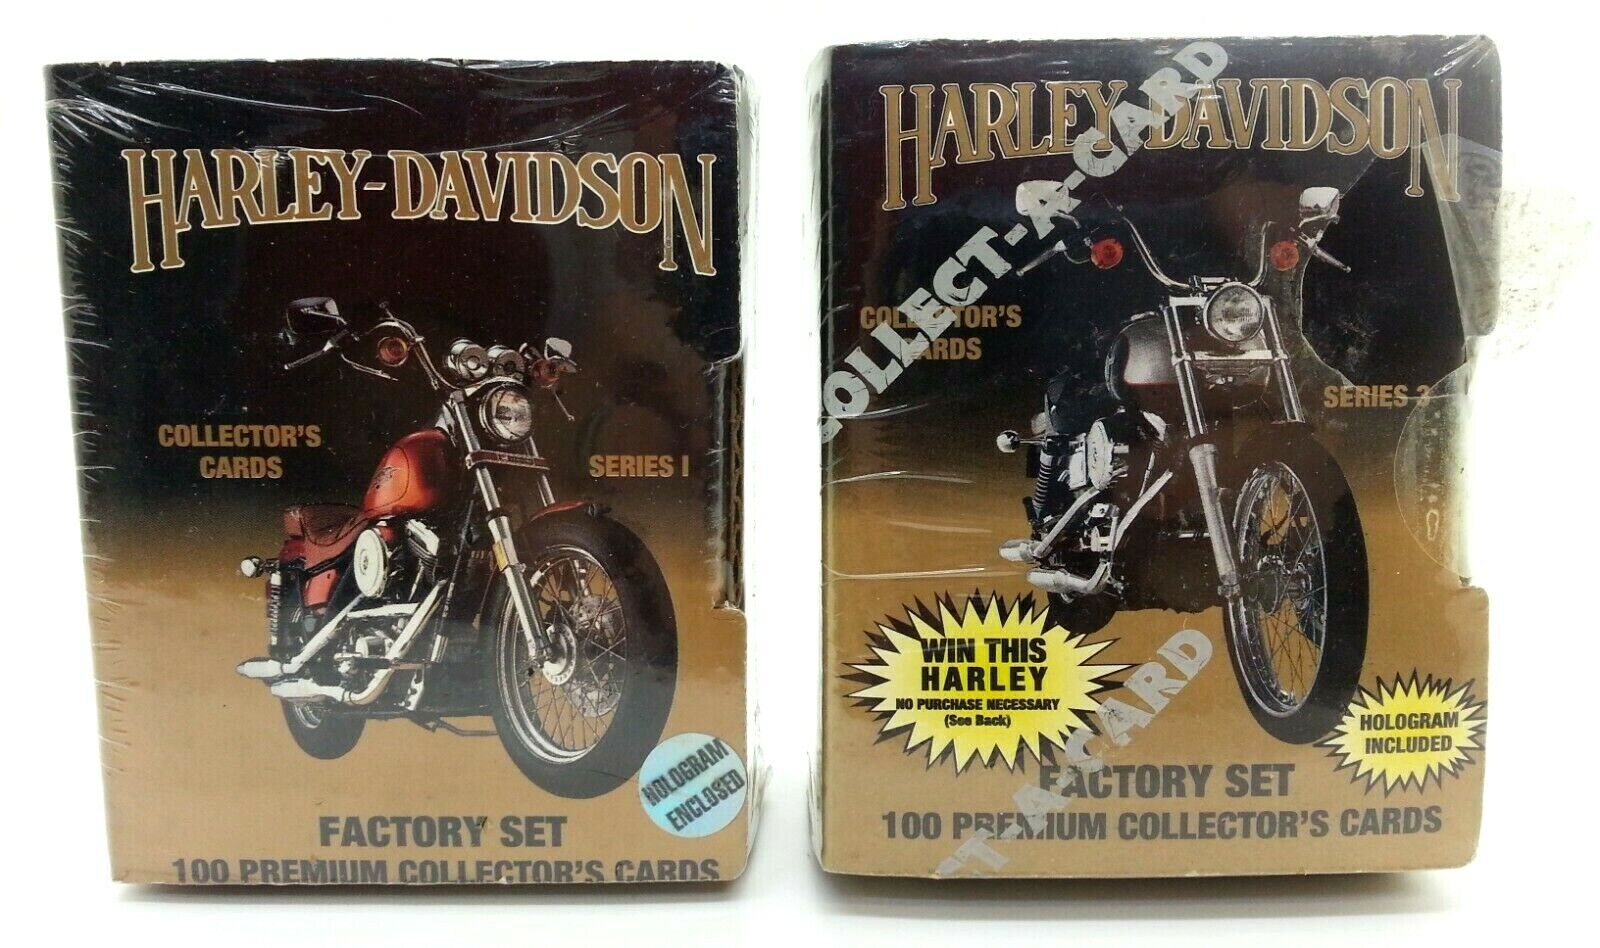 Harley Davidson Collector Cards Series 1 & 3 Factory Sealed Boxes 1992-1993 200p